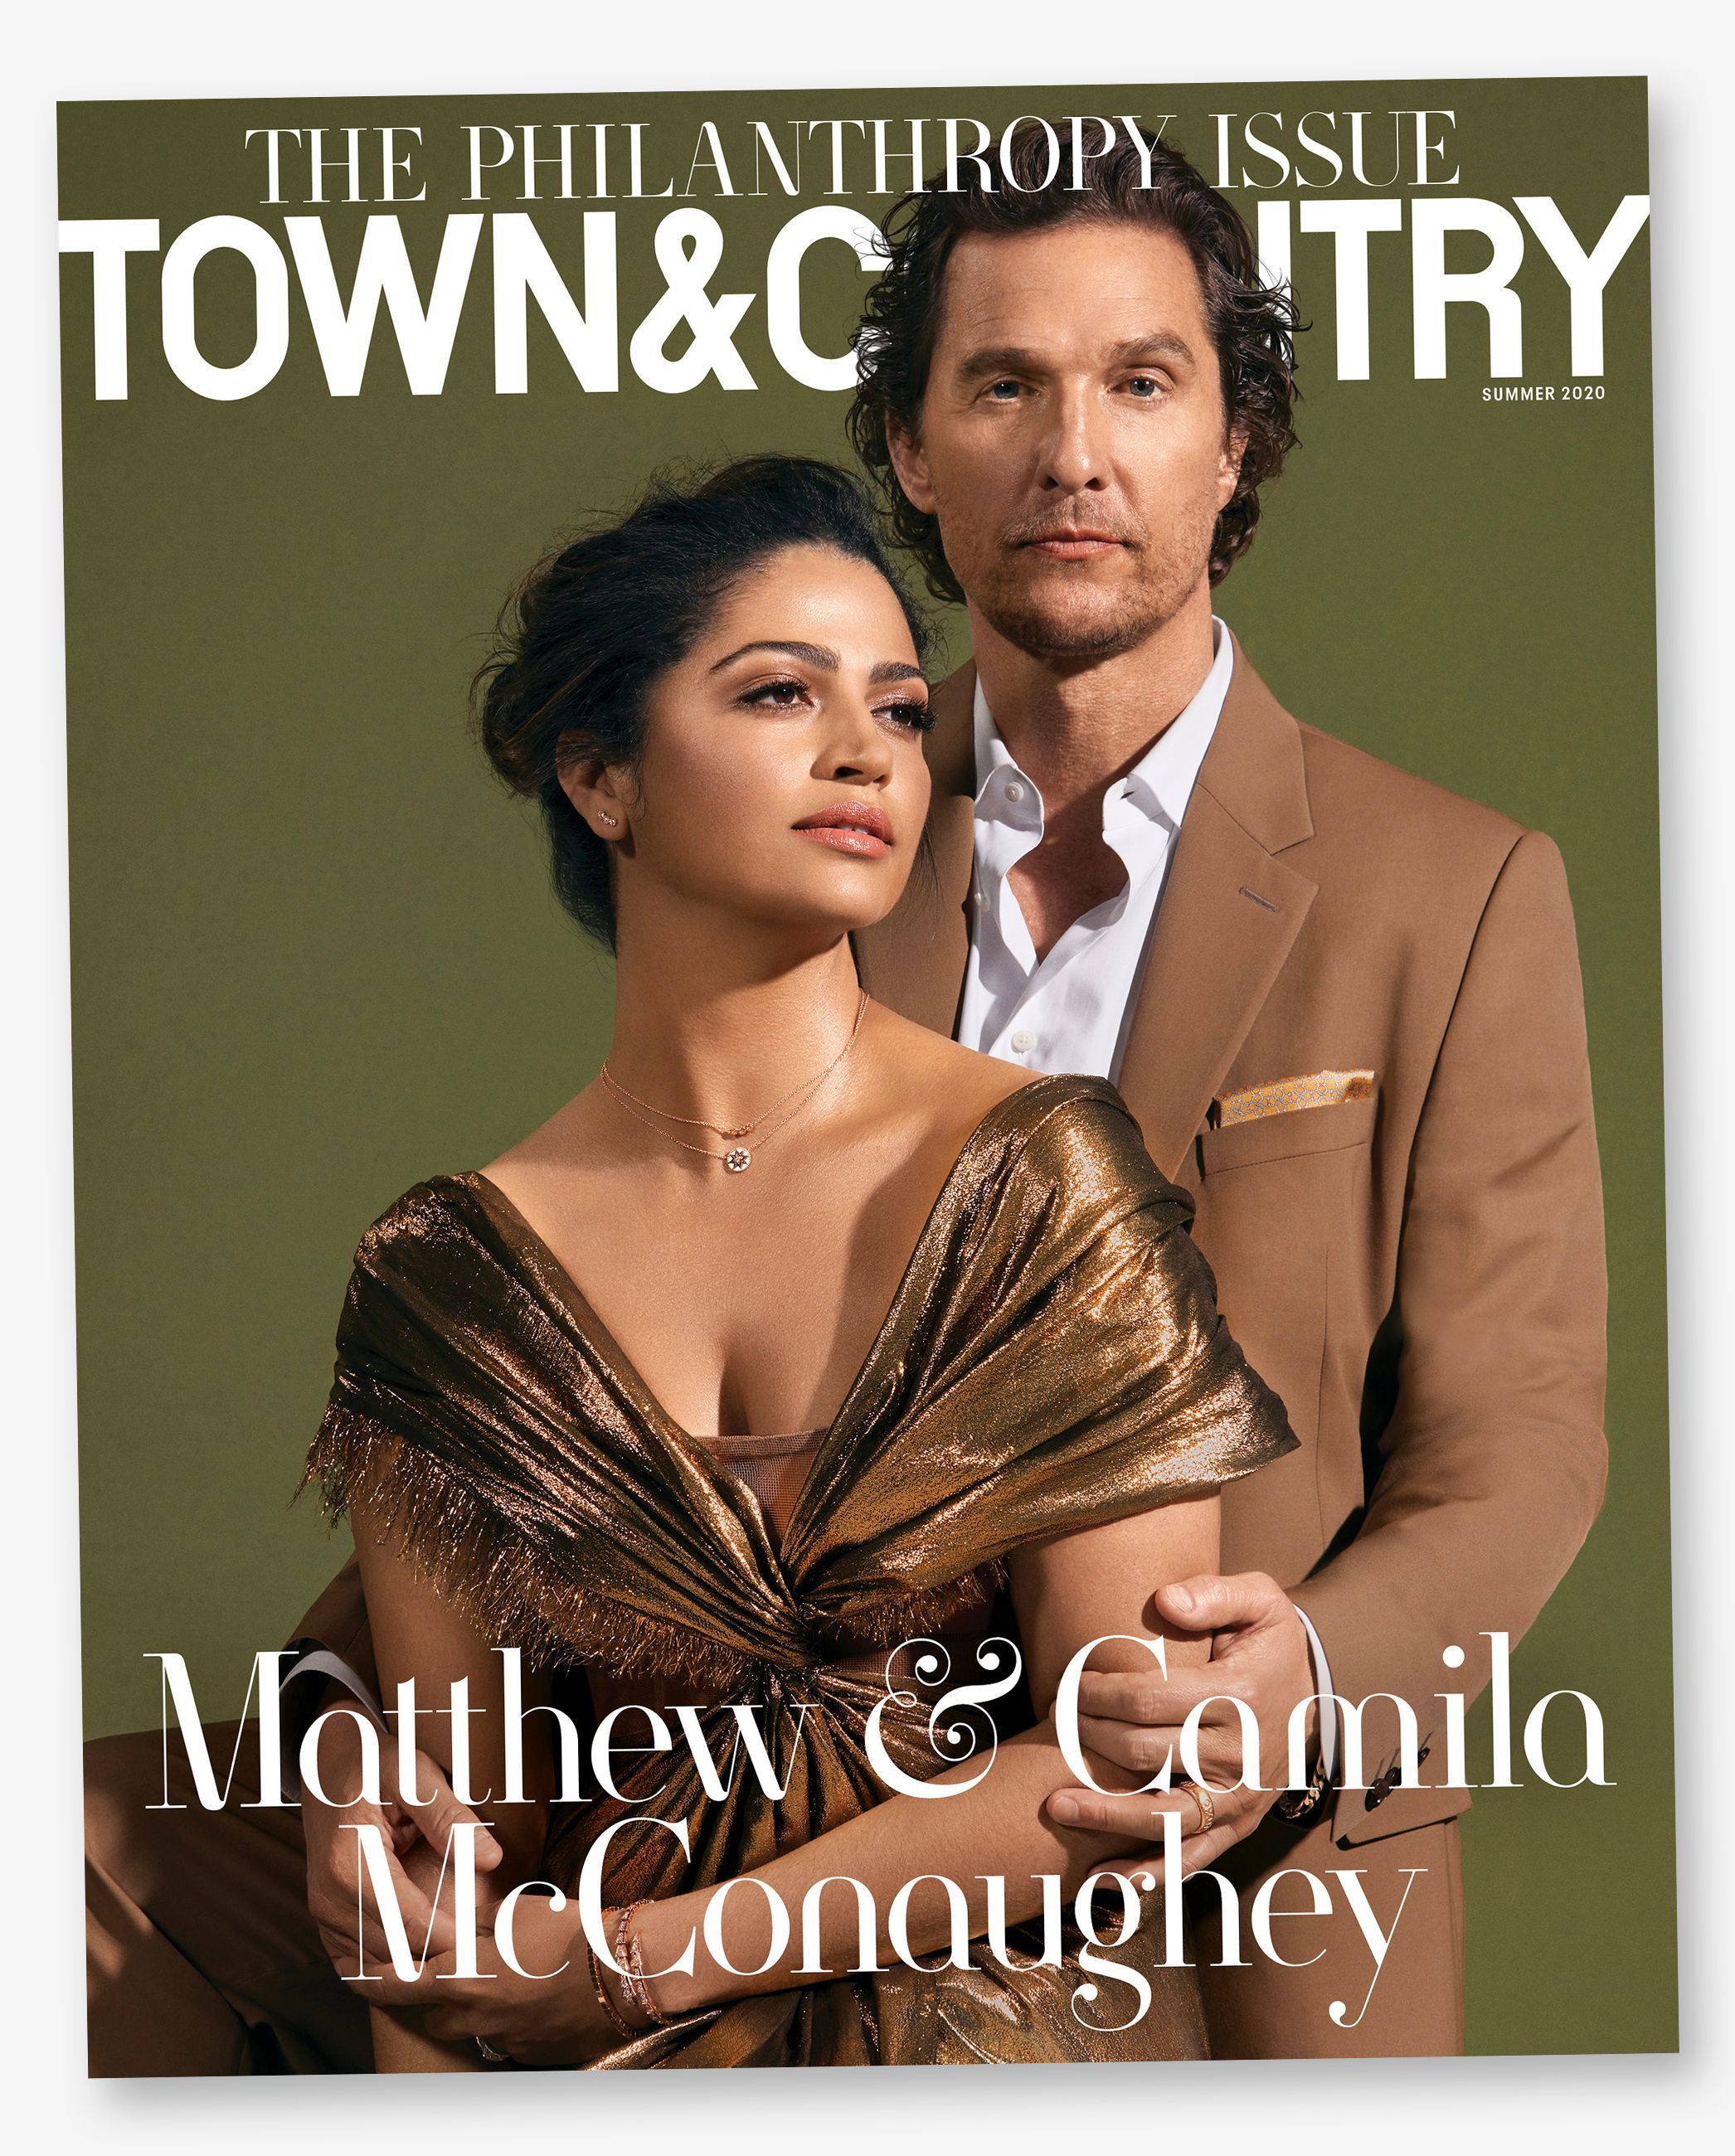 SUBSCRIBE NOW TO TOWN & COUNTRY